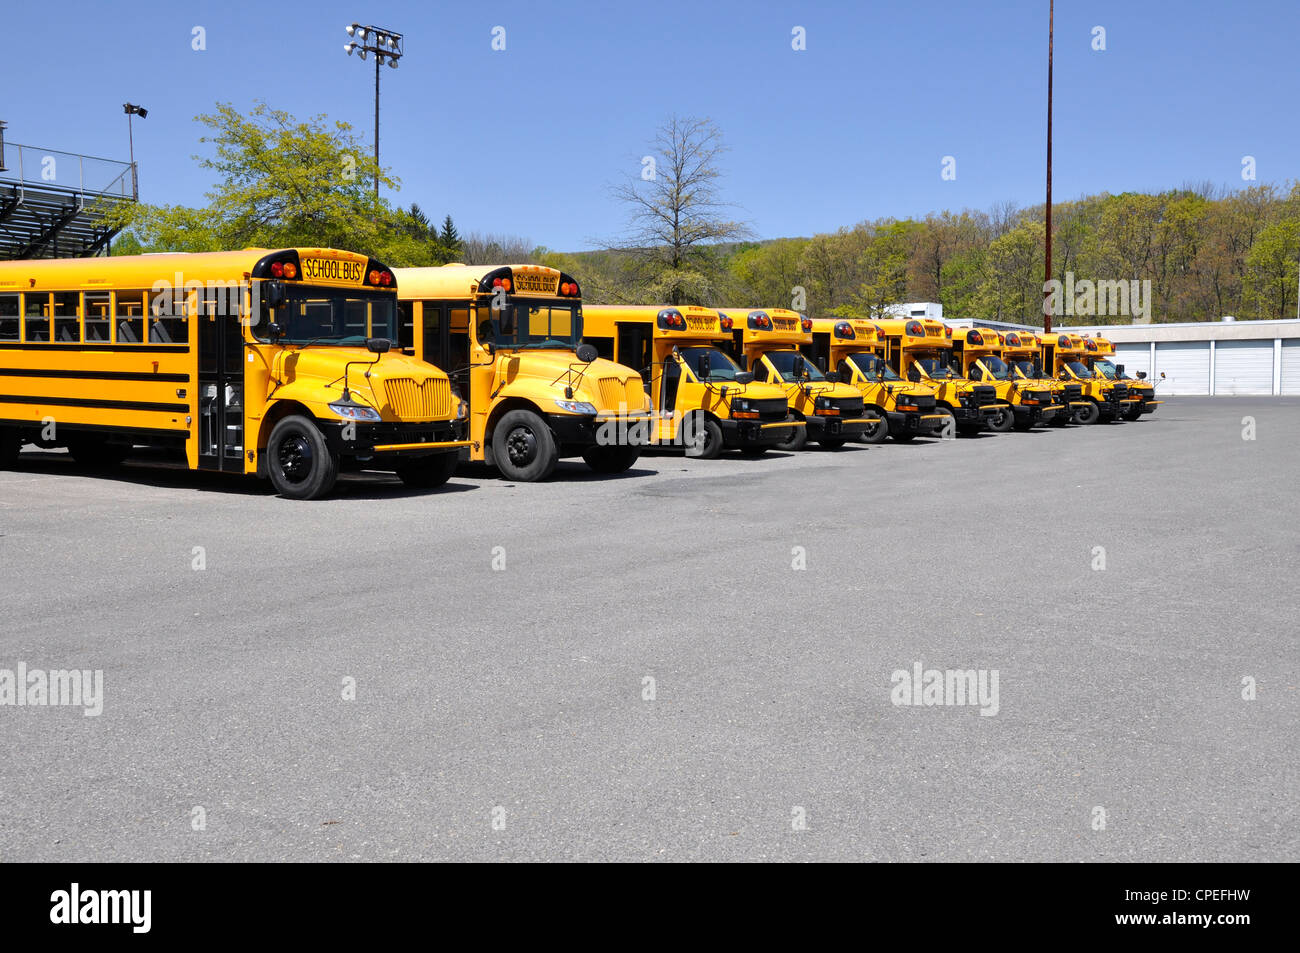 row of school buses parked by a macadam parking area Stock Photo